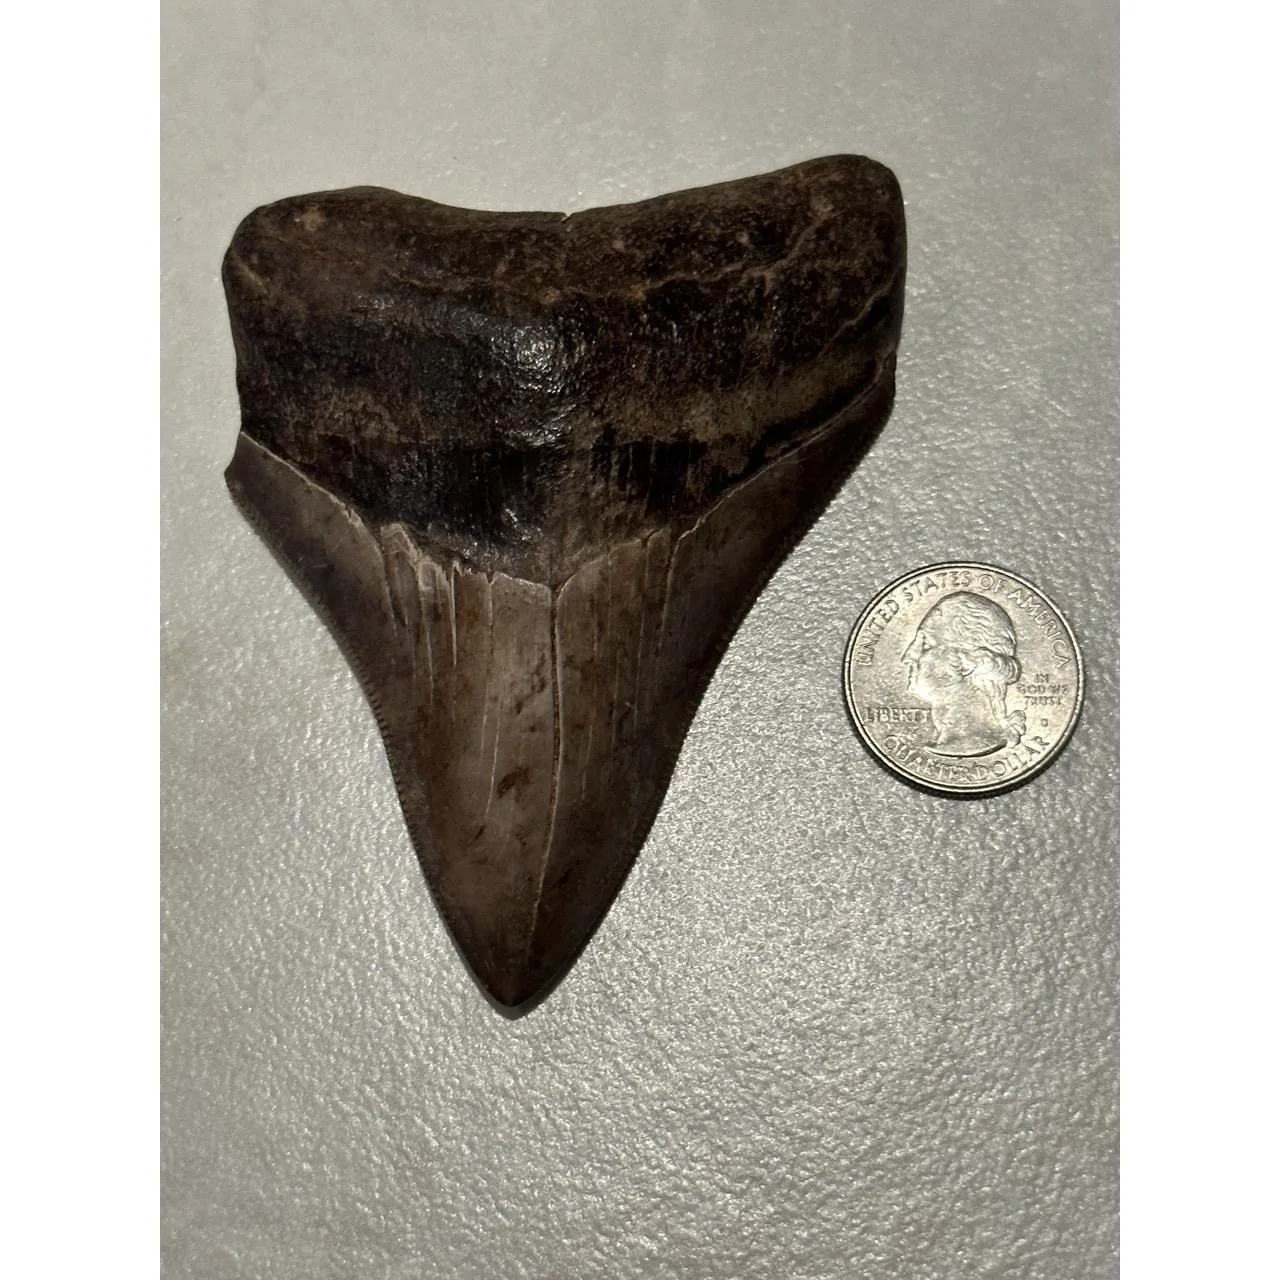 Megalodon Tooth, Georgia 3.76 inch Prehistoric Online